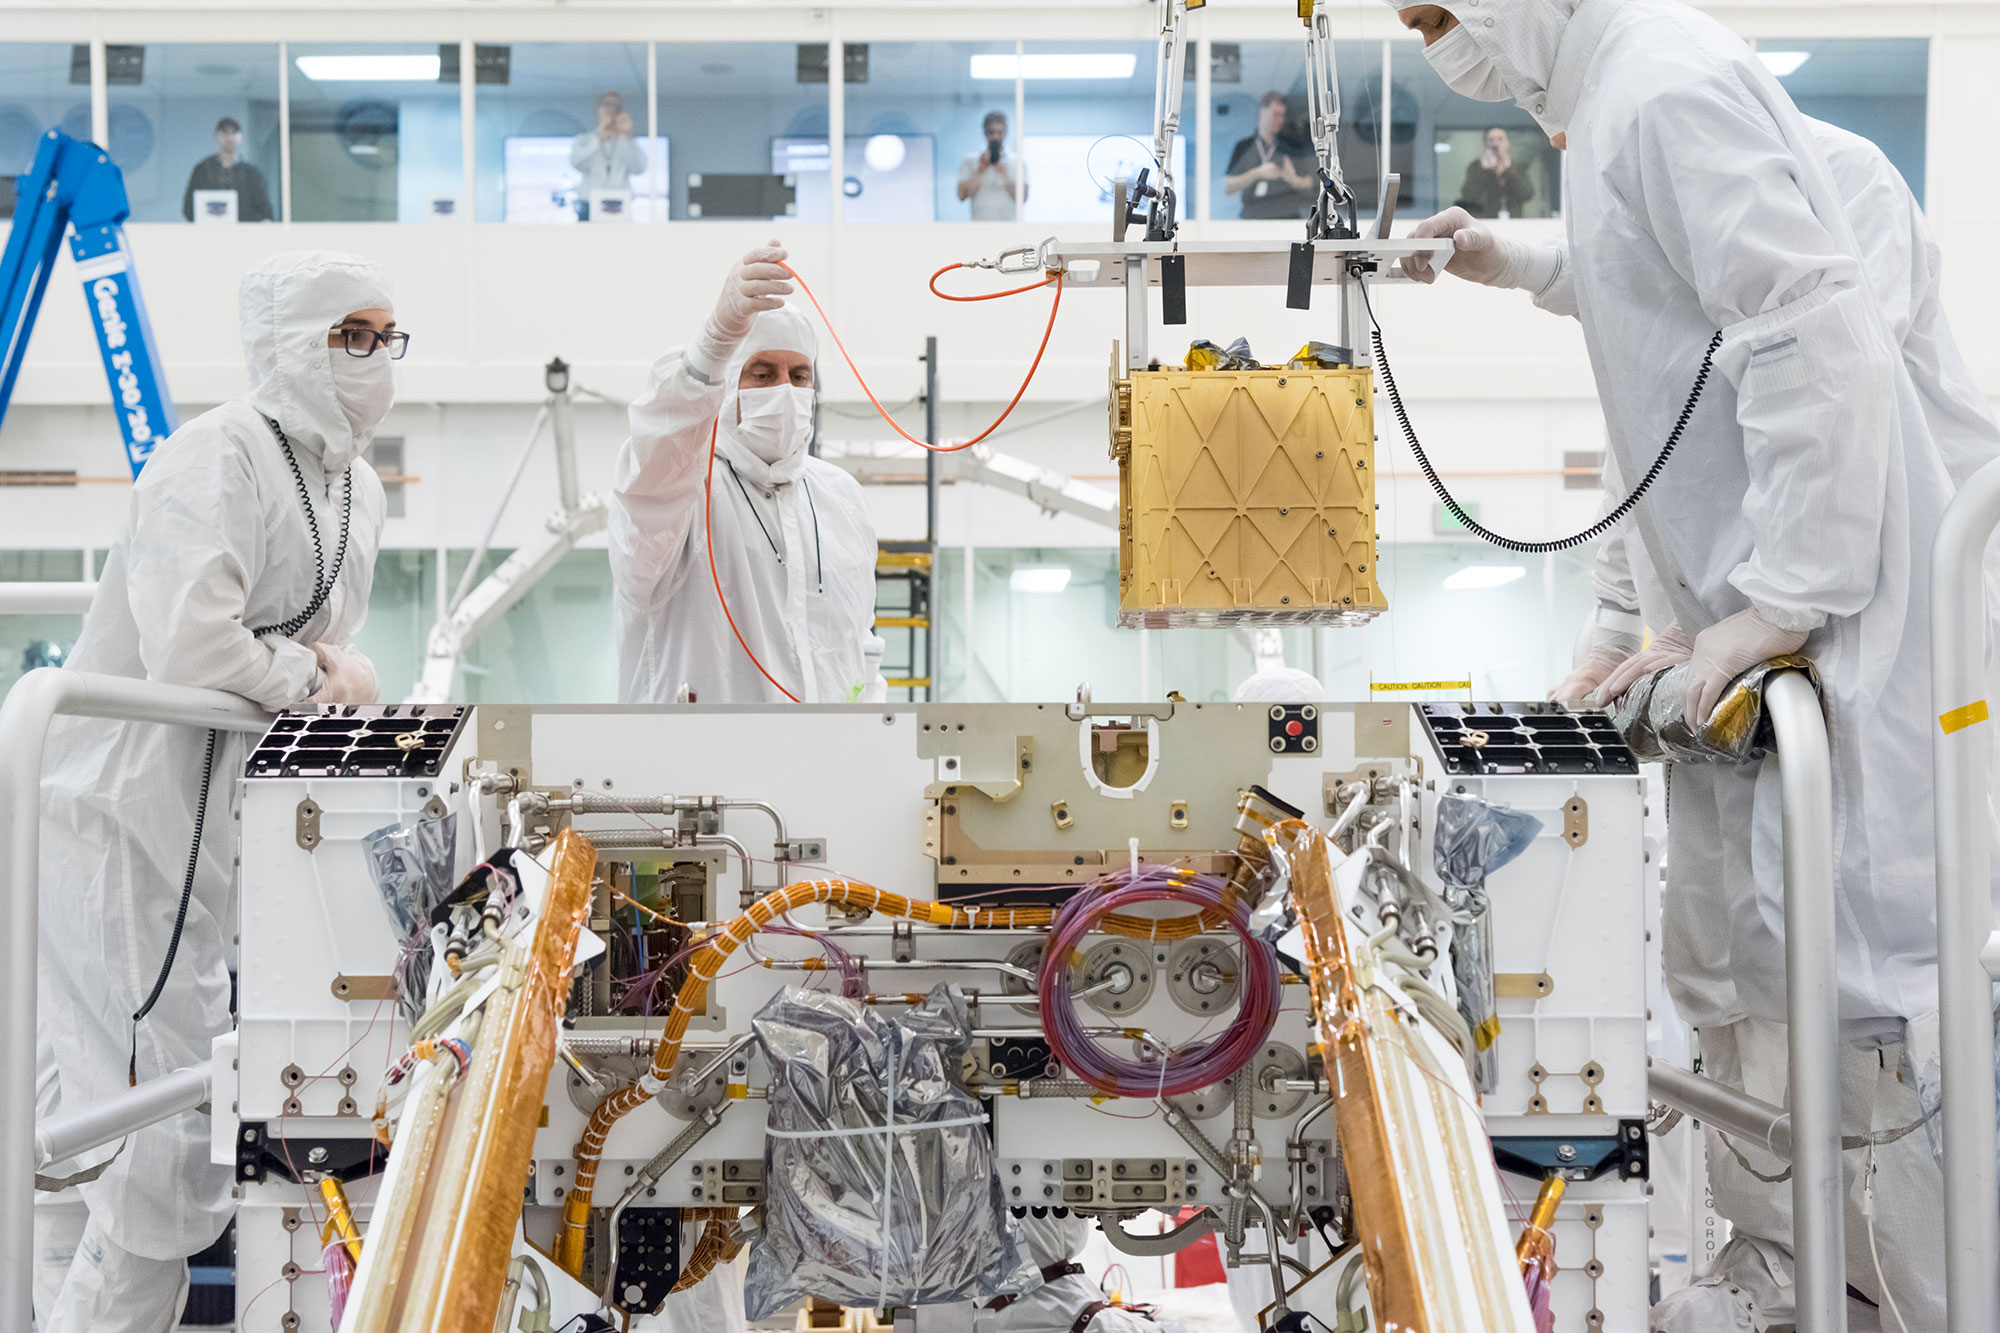 Members of NASA’s Mars 2020 project install the Mars Oxygen In-Situ Resource Utilization Experiment (MOXIE) into the chassis of NASA’s next Mars rover.